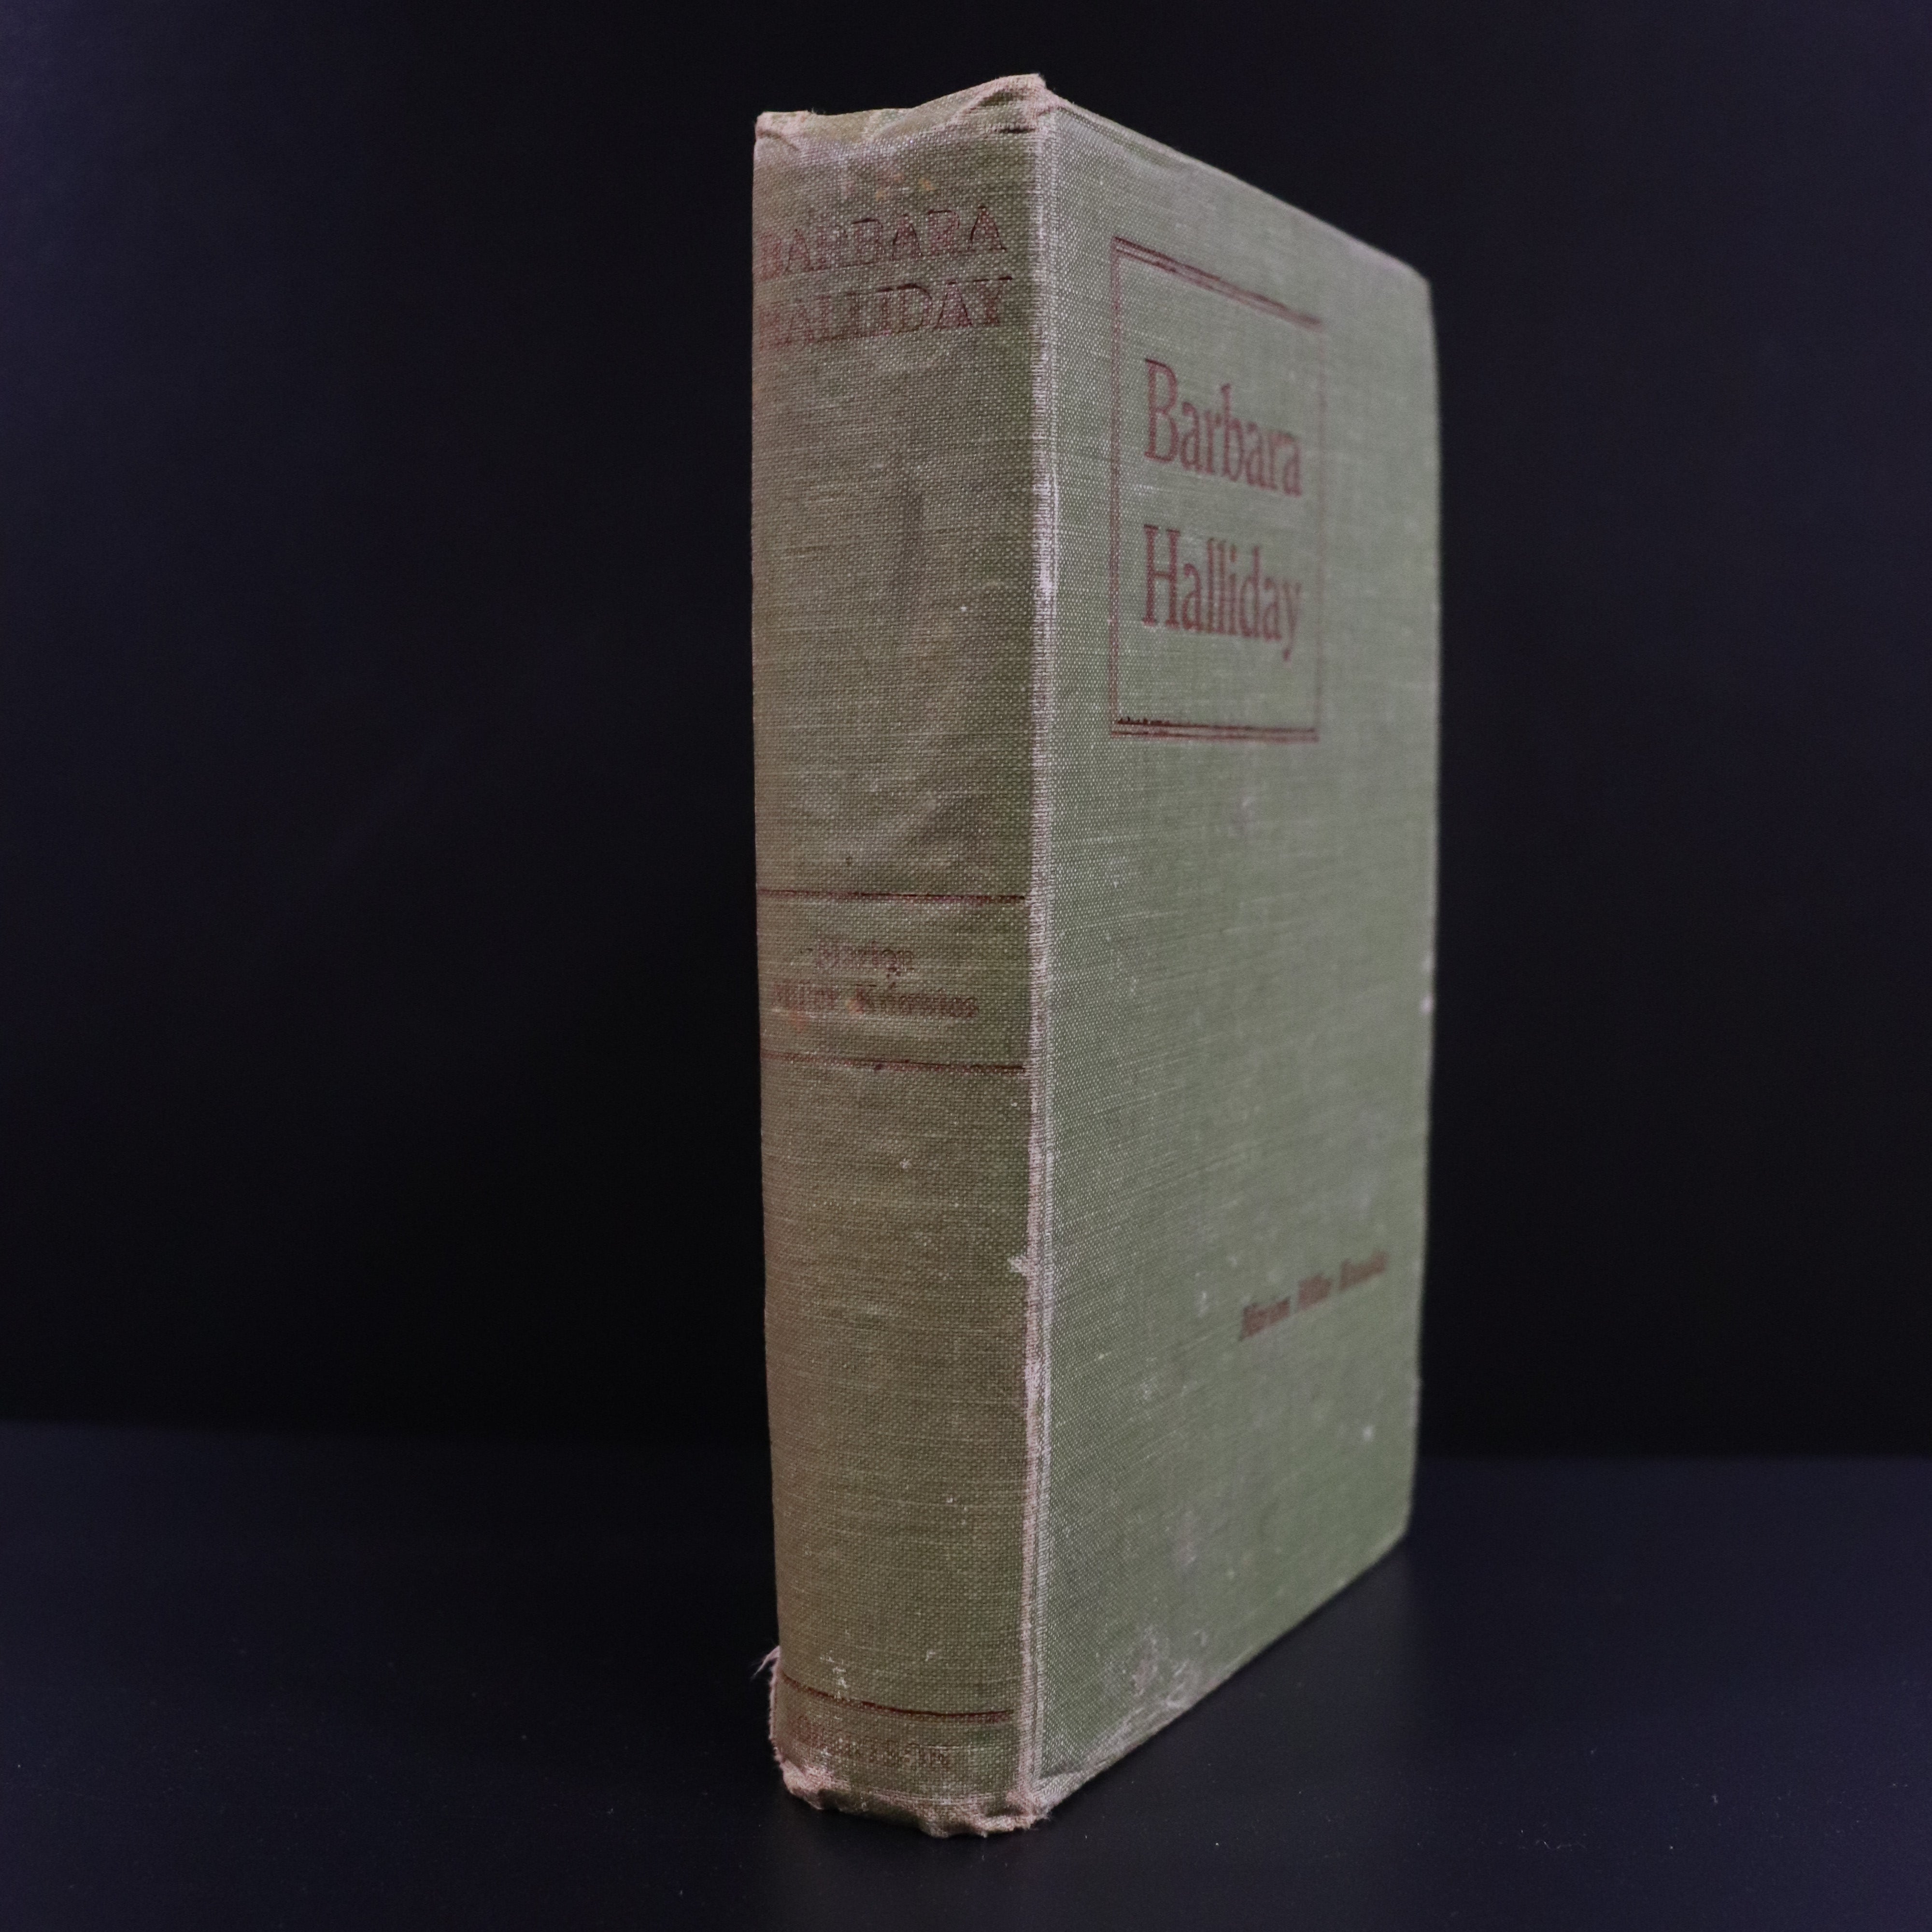 c1896 Barbara Halliday by Marion M. Knowles Antique Australian Fiction Book